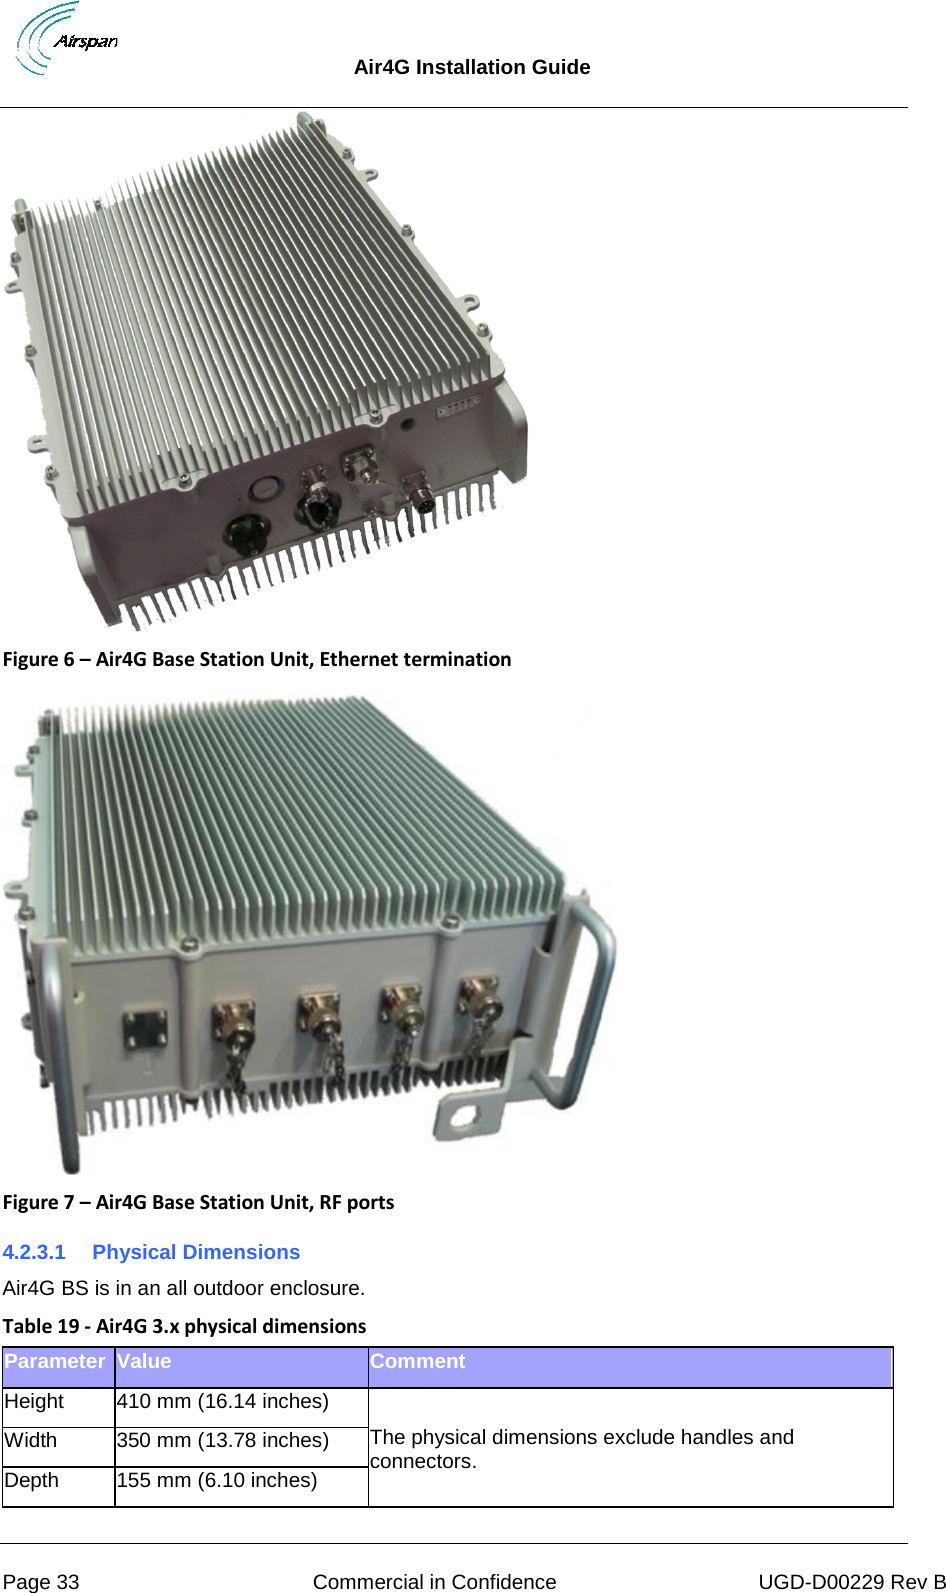  Air4G Installation Guide     Page 33 Commercial in Confidence UGD-D00229 Rev B  Figure 6 – Air4G Base Station Unit, Ethernet termination   Figure 7 – Air4G Base Station Unit, RF ports 4.2.3.1 Physical Dimensions Air4G BS is in an all outdoor enclosure. Table 19 - Air4G 3.x physical dimensions Parameter Value Comment Height 410 mm (16.14 inches)  The physical dimensions exclude handles and connectors. Width 350 mm (13.78 inches) Depth 155 mm (6.10 inches) 